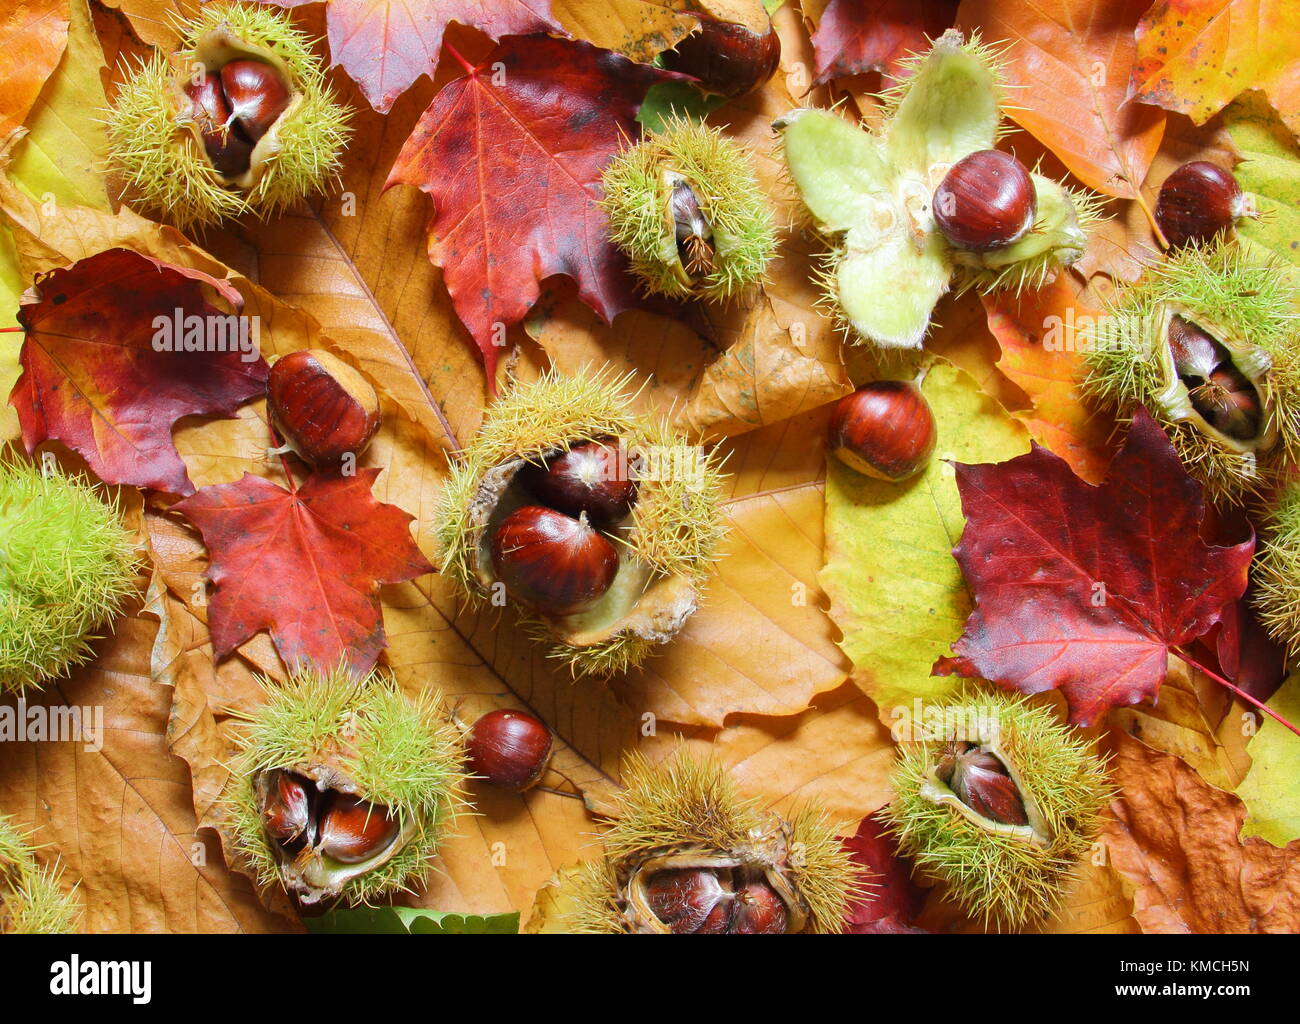 Fallen sweet chestnuts (Castanea sativa), some encased in their spiny cases on foliage  in autumn (November) Yorkshire UK Stock Photo